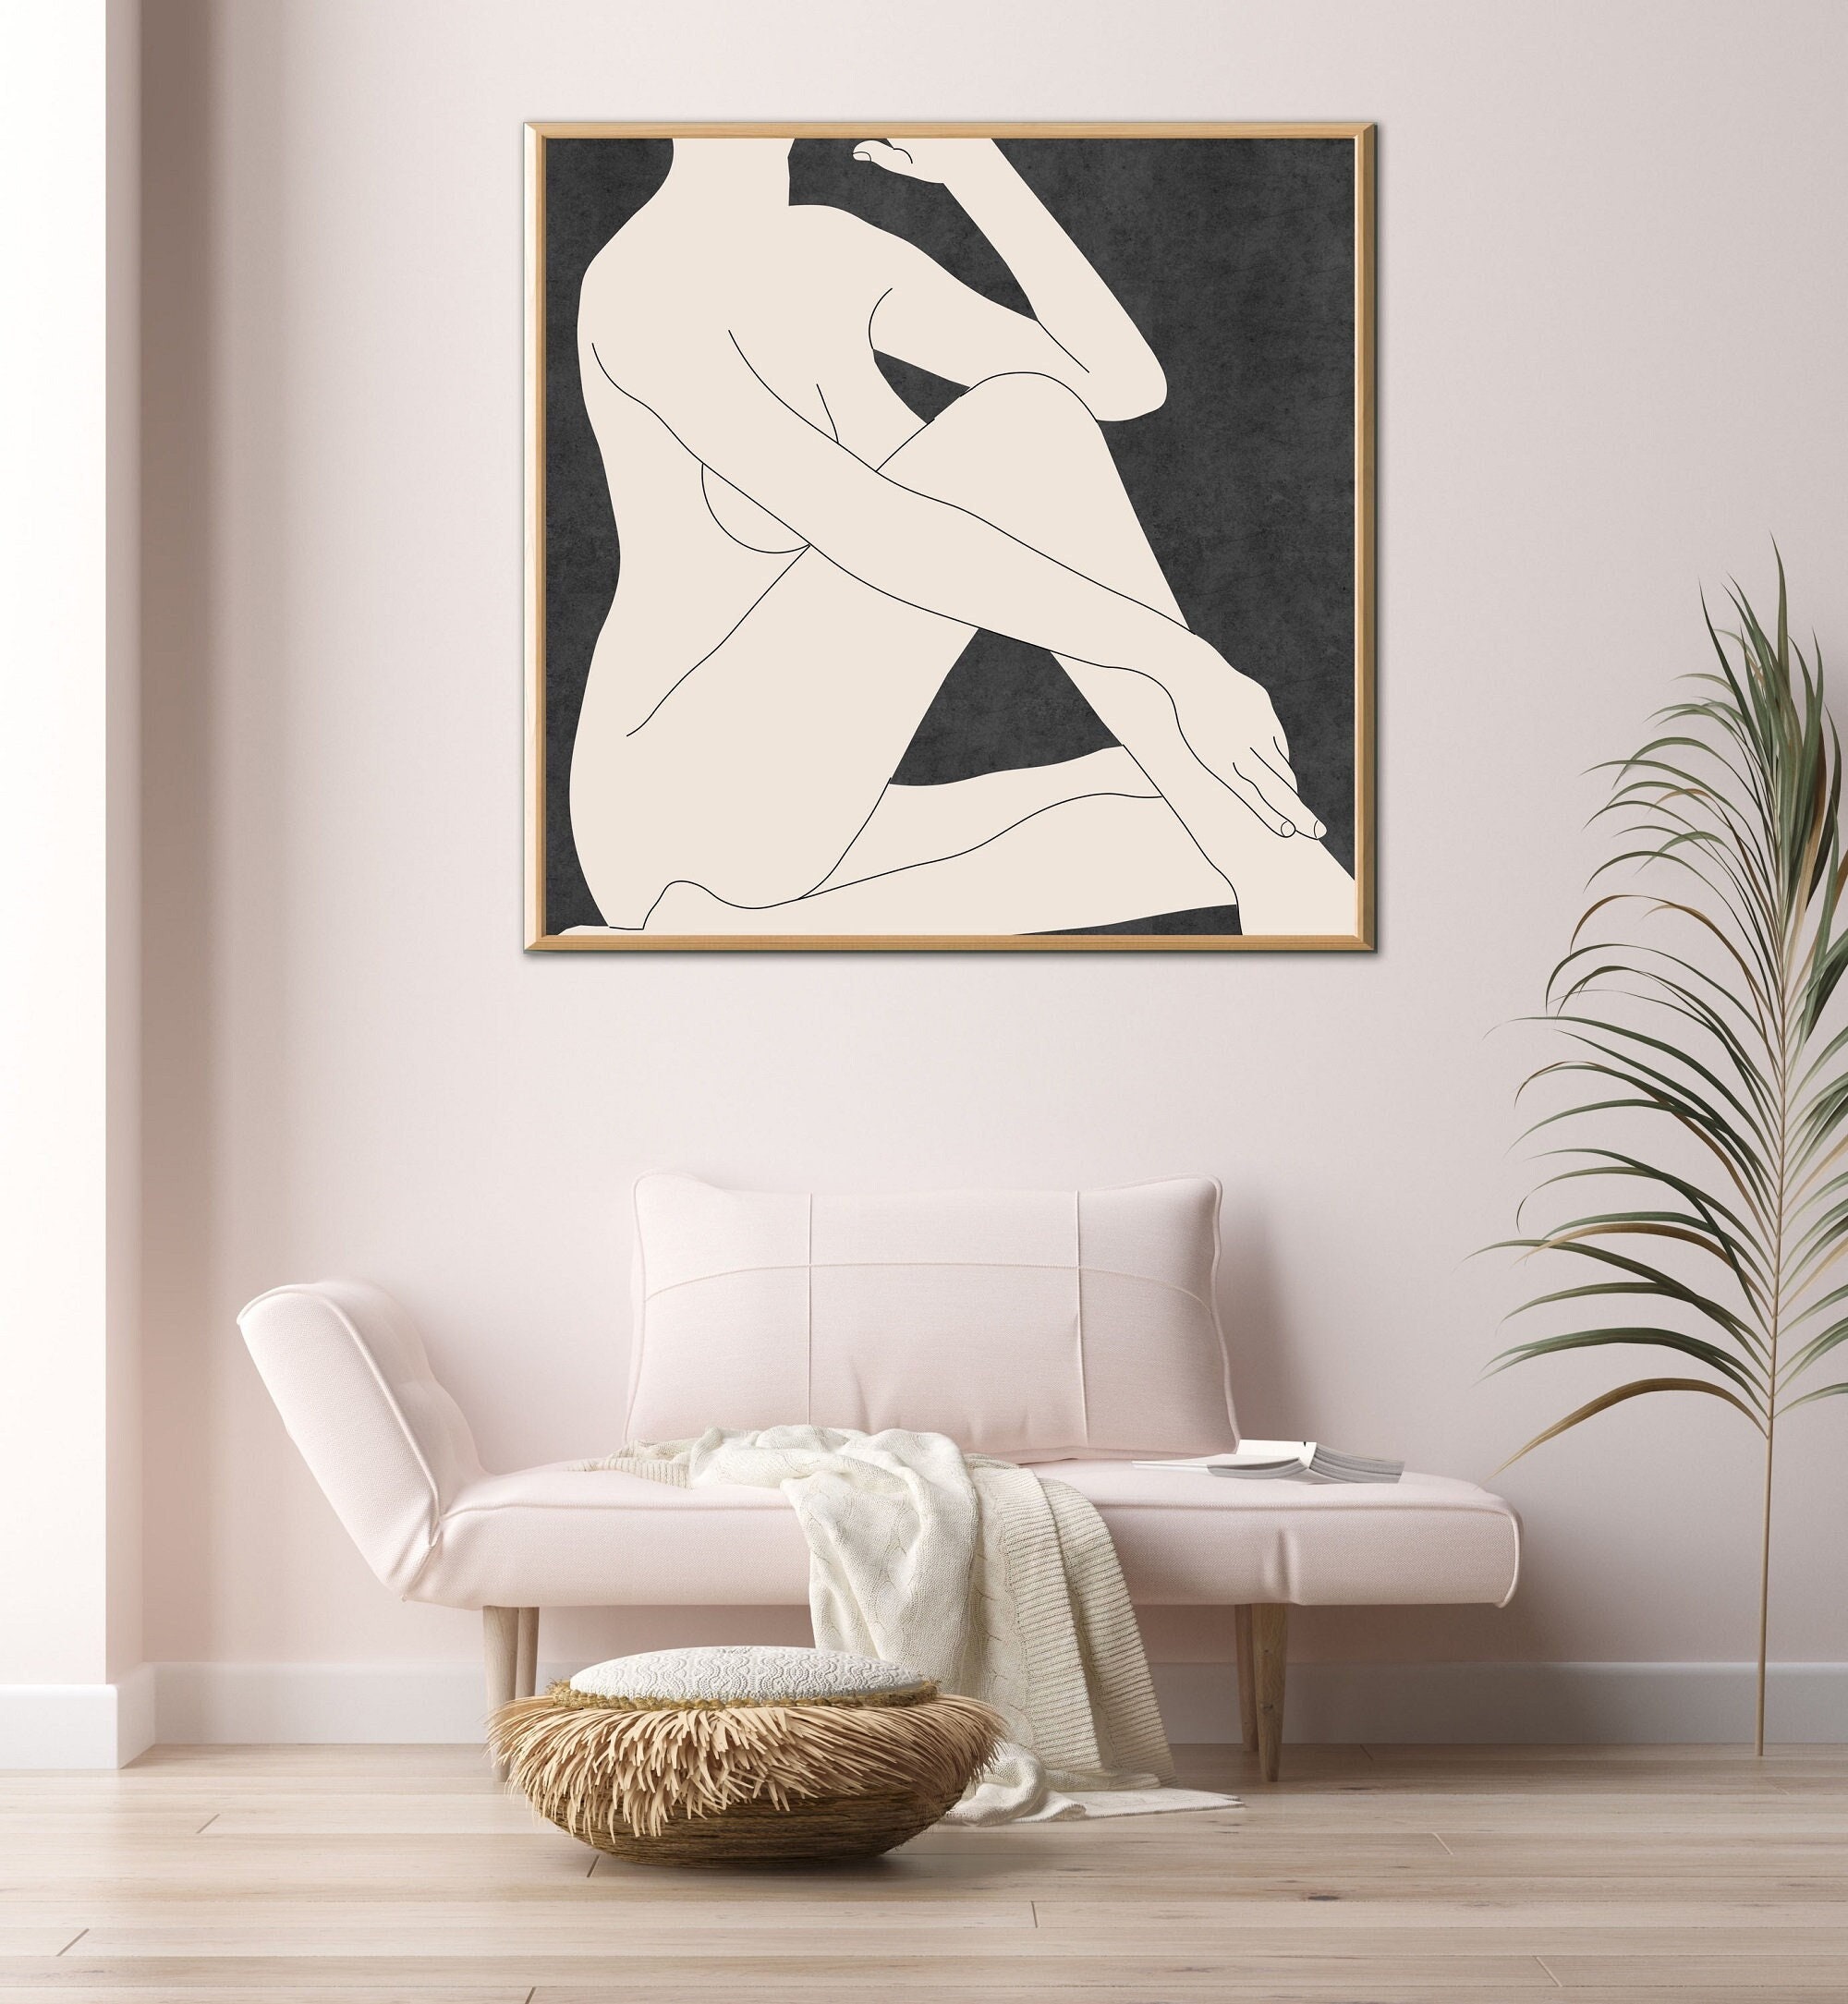 Hand Drawn Nude Female Figure Drawing Print. Black and White Sketch Art.  Unique Gift for Her, Tasteful Boudoir, Scandi, Country Style Decor 